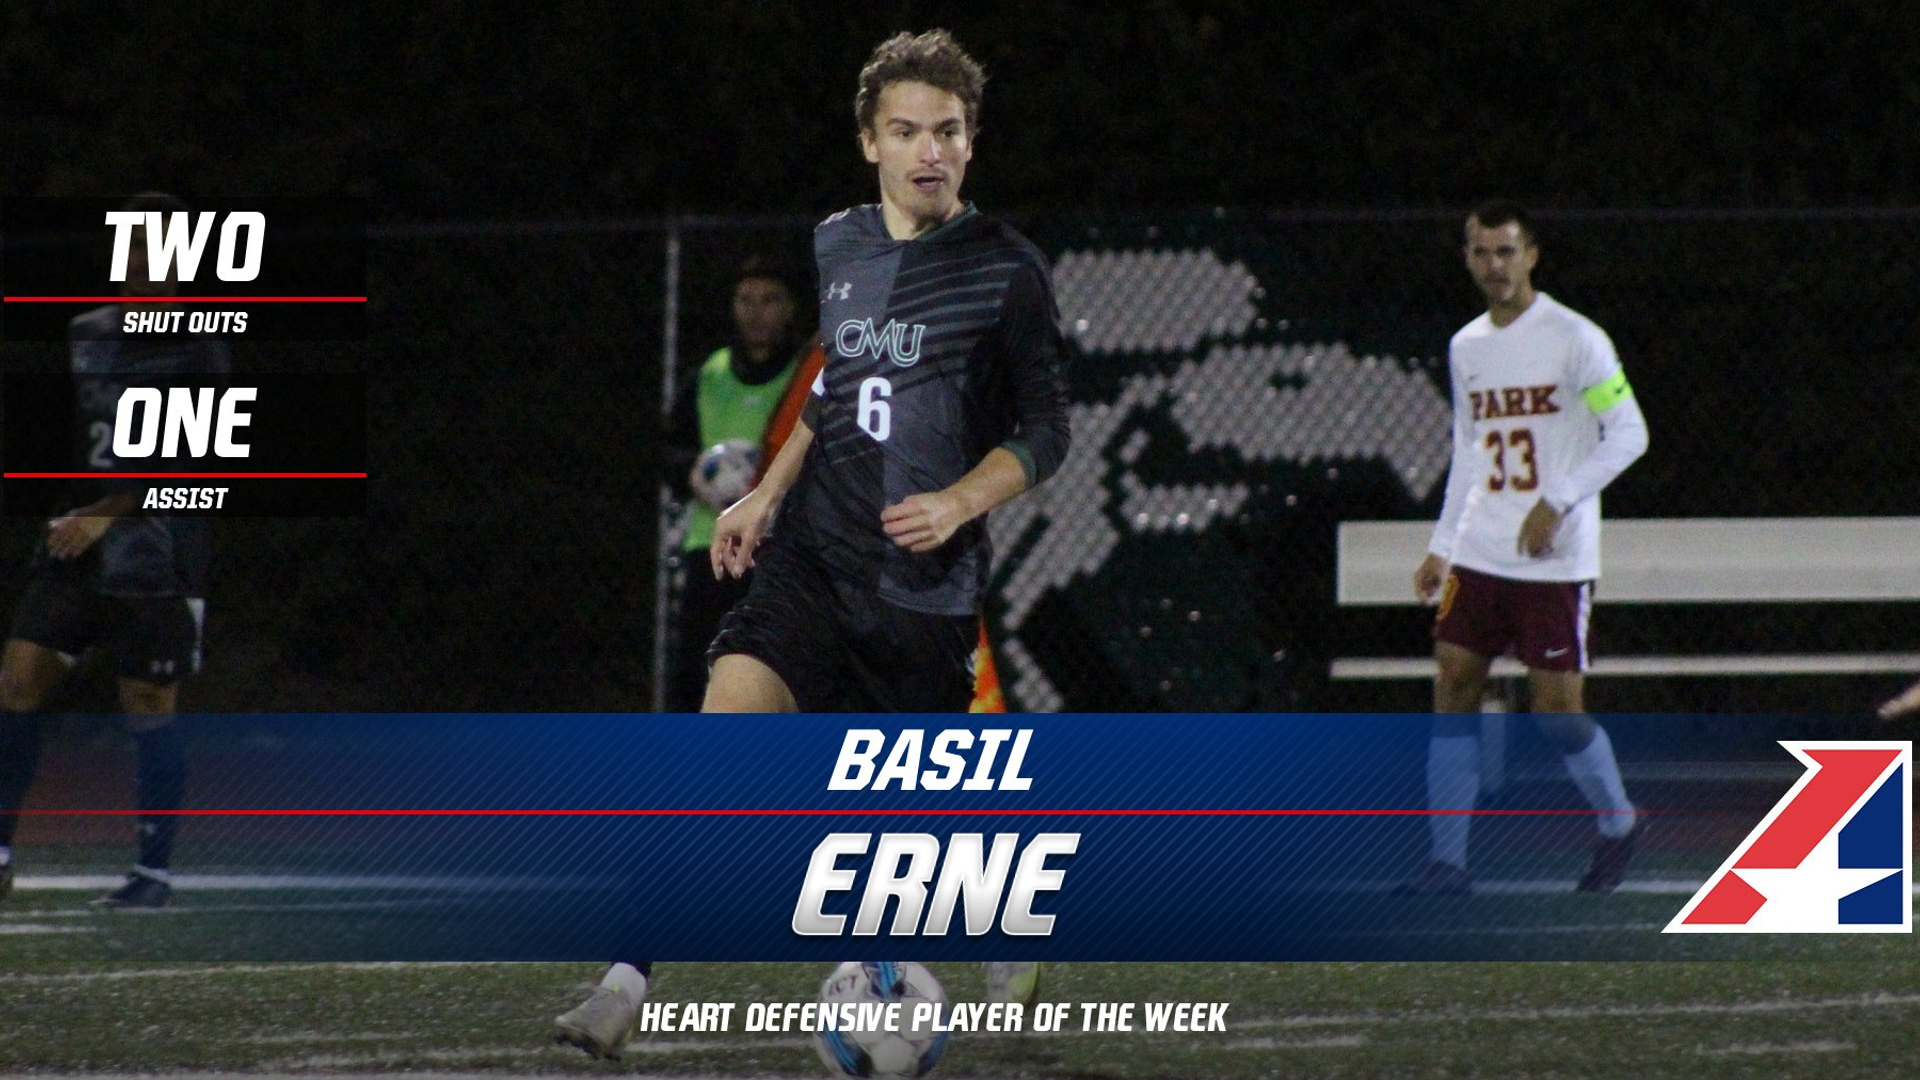 Erne Tabbed as Heart Defensive Player of the Week